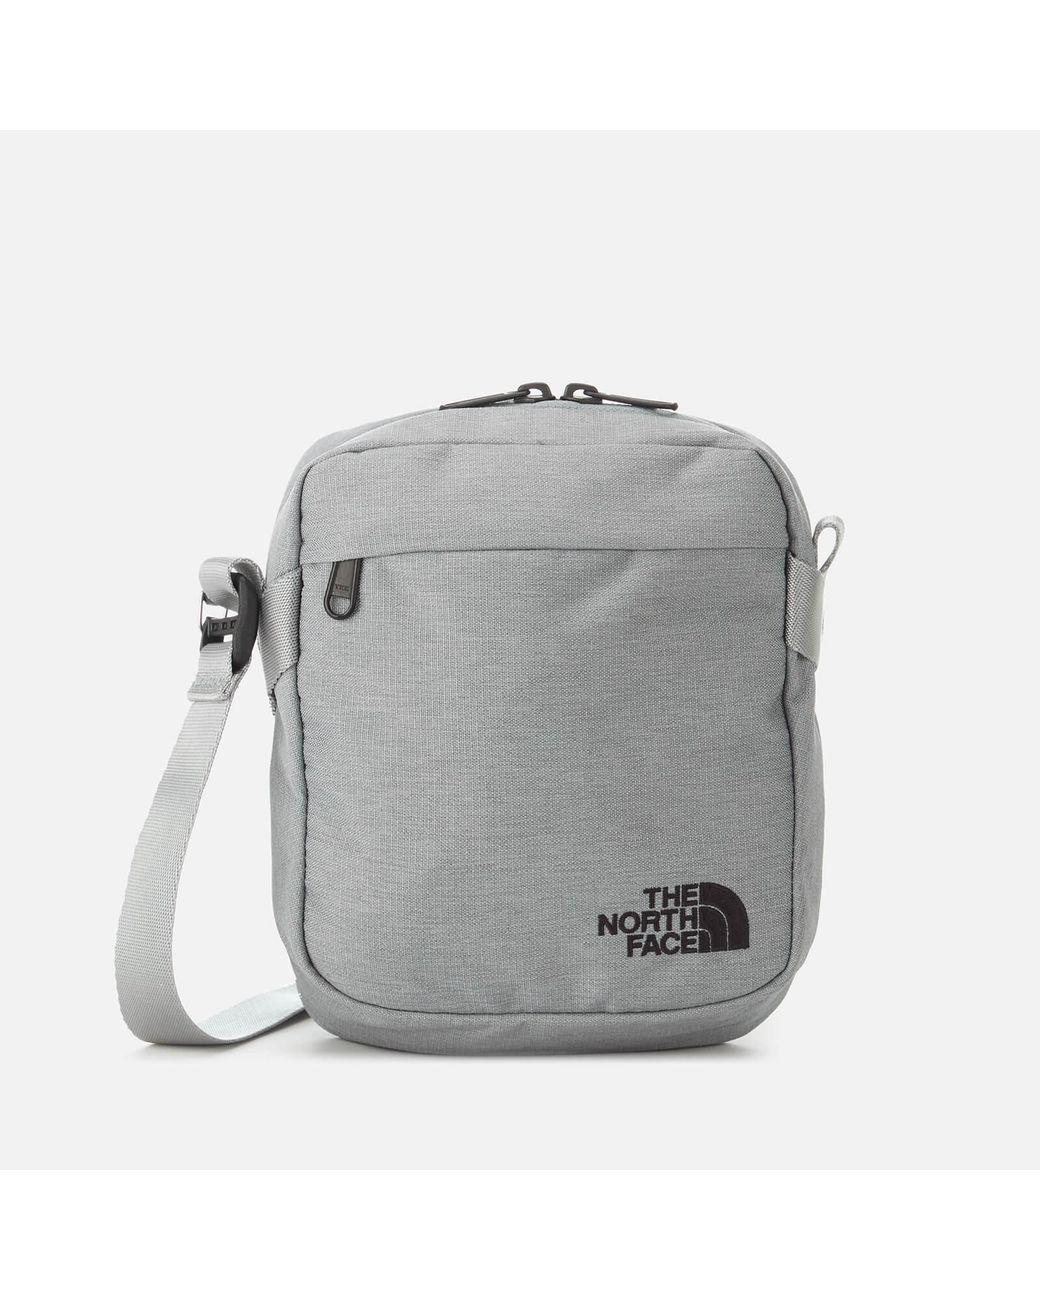 The North Face Convertible Shoulder Bag in Grey | Lyst Australia